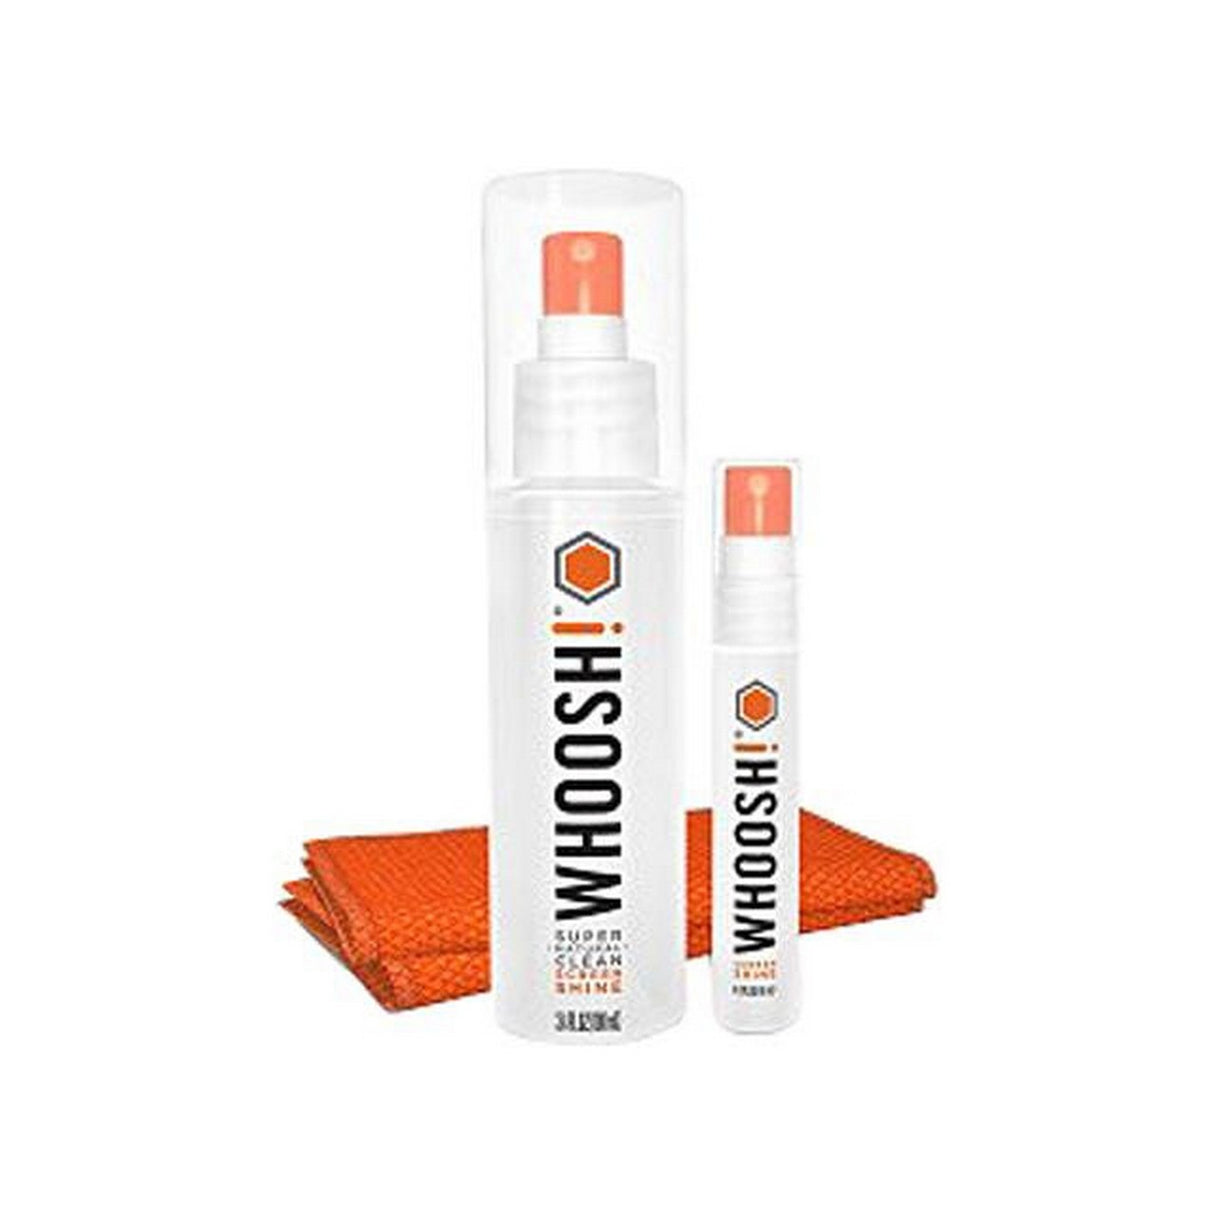 Whoosh 2 Cleaning Cloths Screen Shine Duo Cleaning Kit, 3.4 + 0.3 oz., 31100BMLSSR